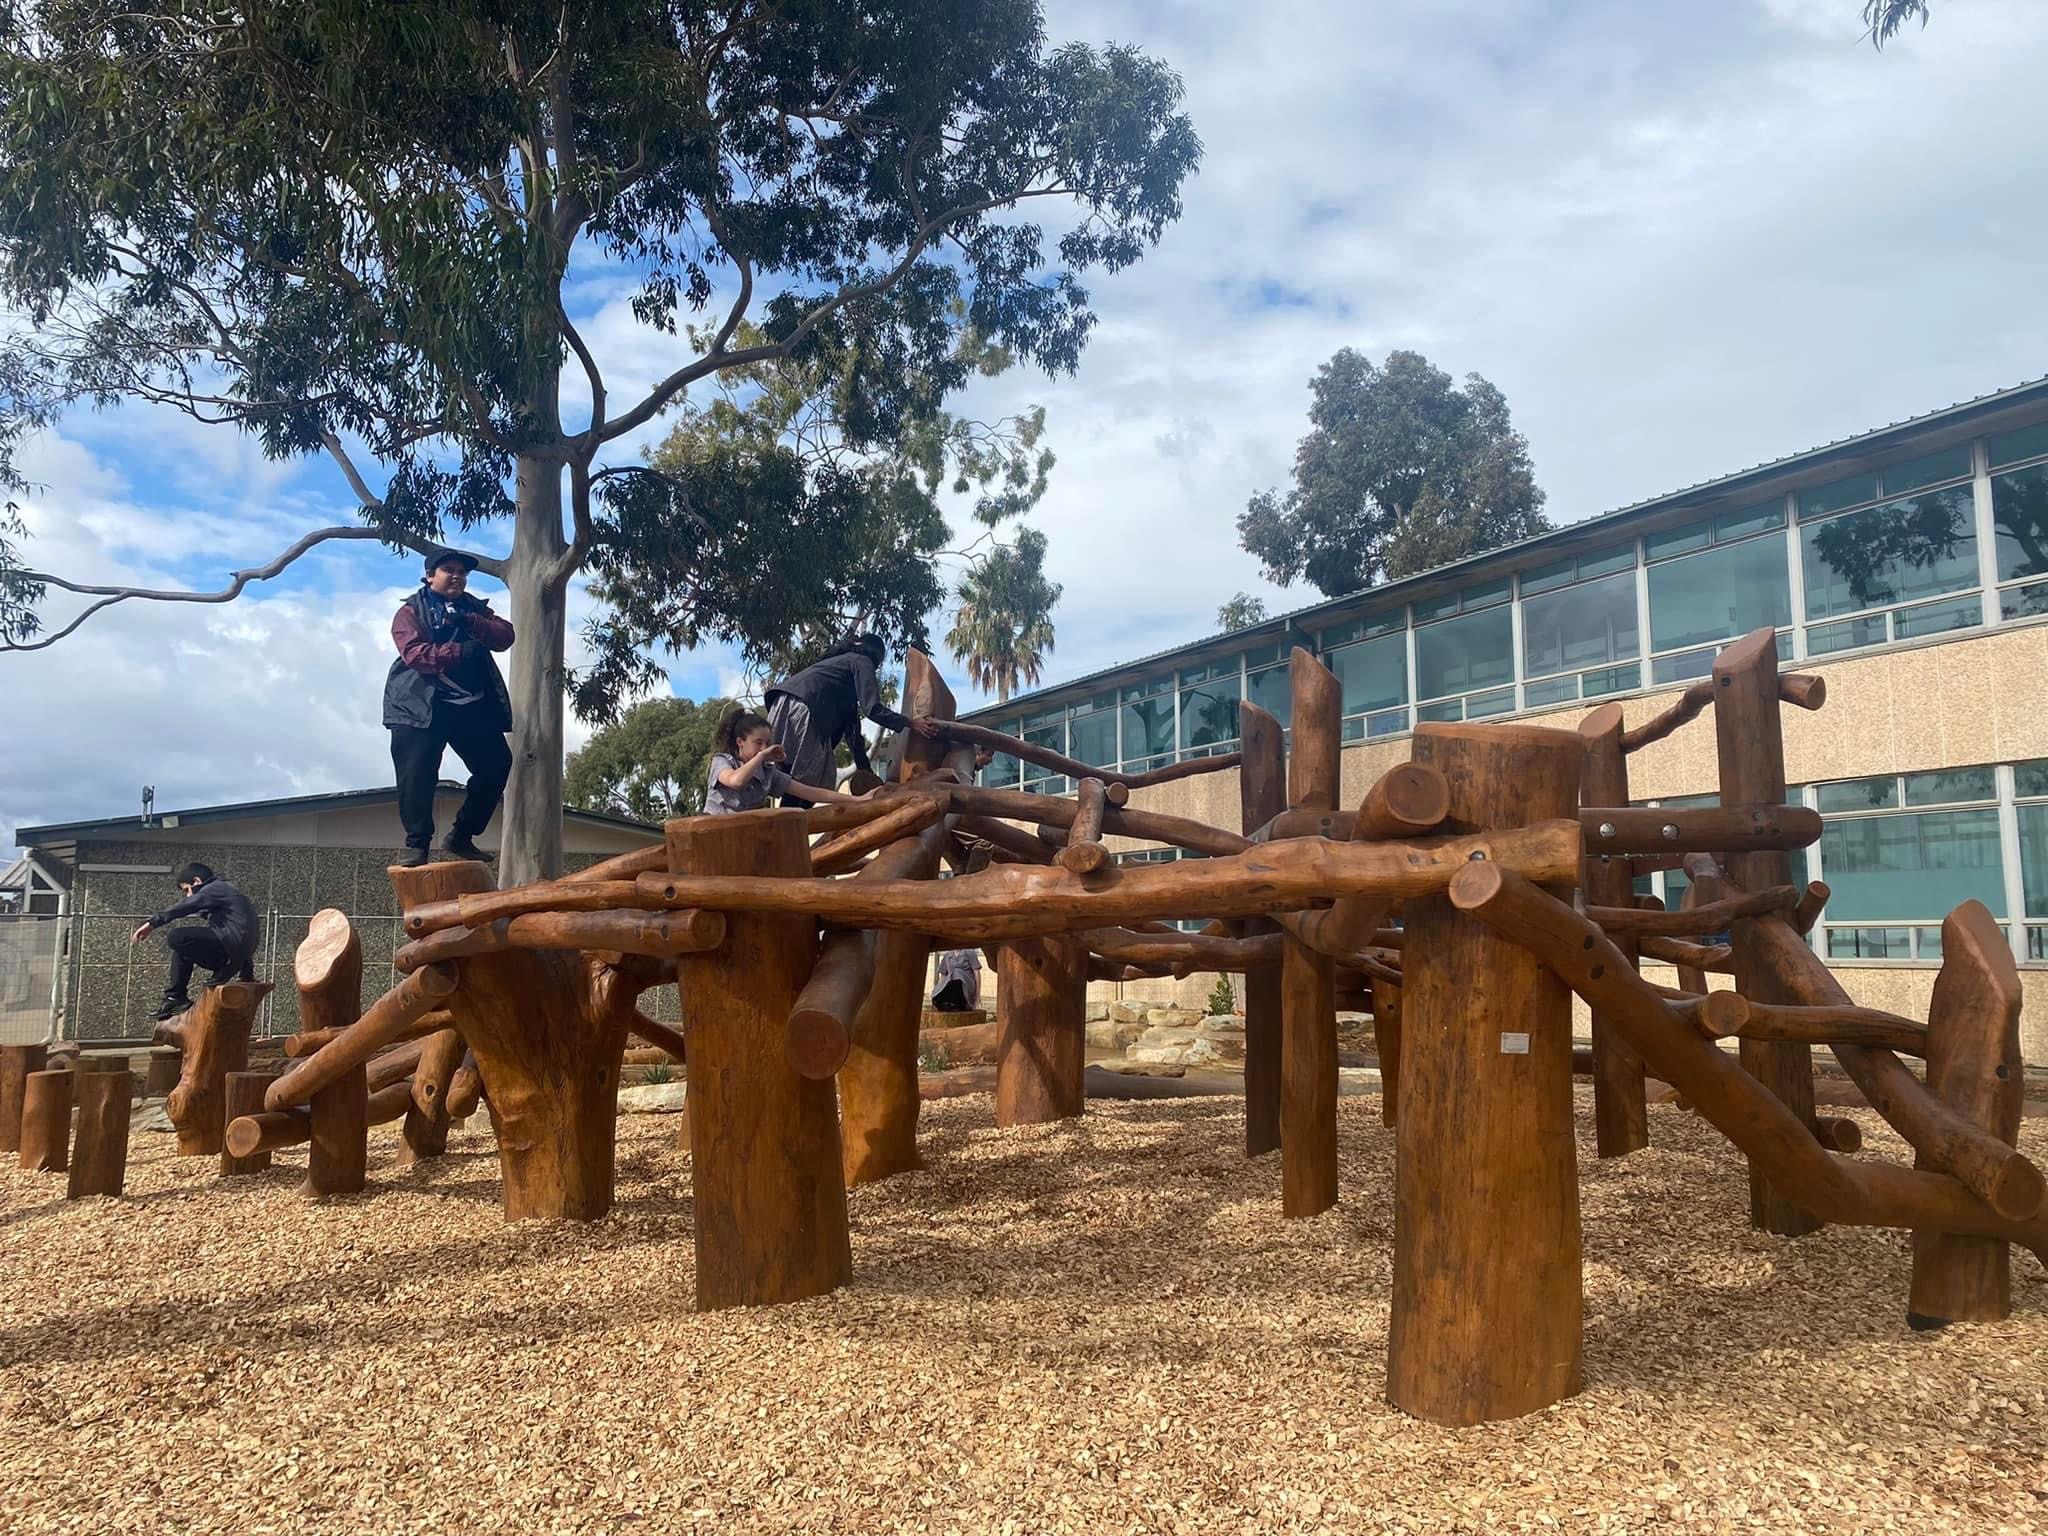 Teens need play structures too